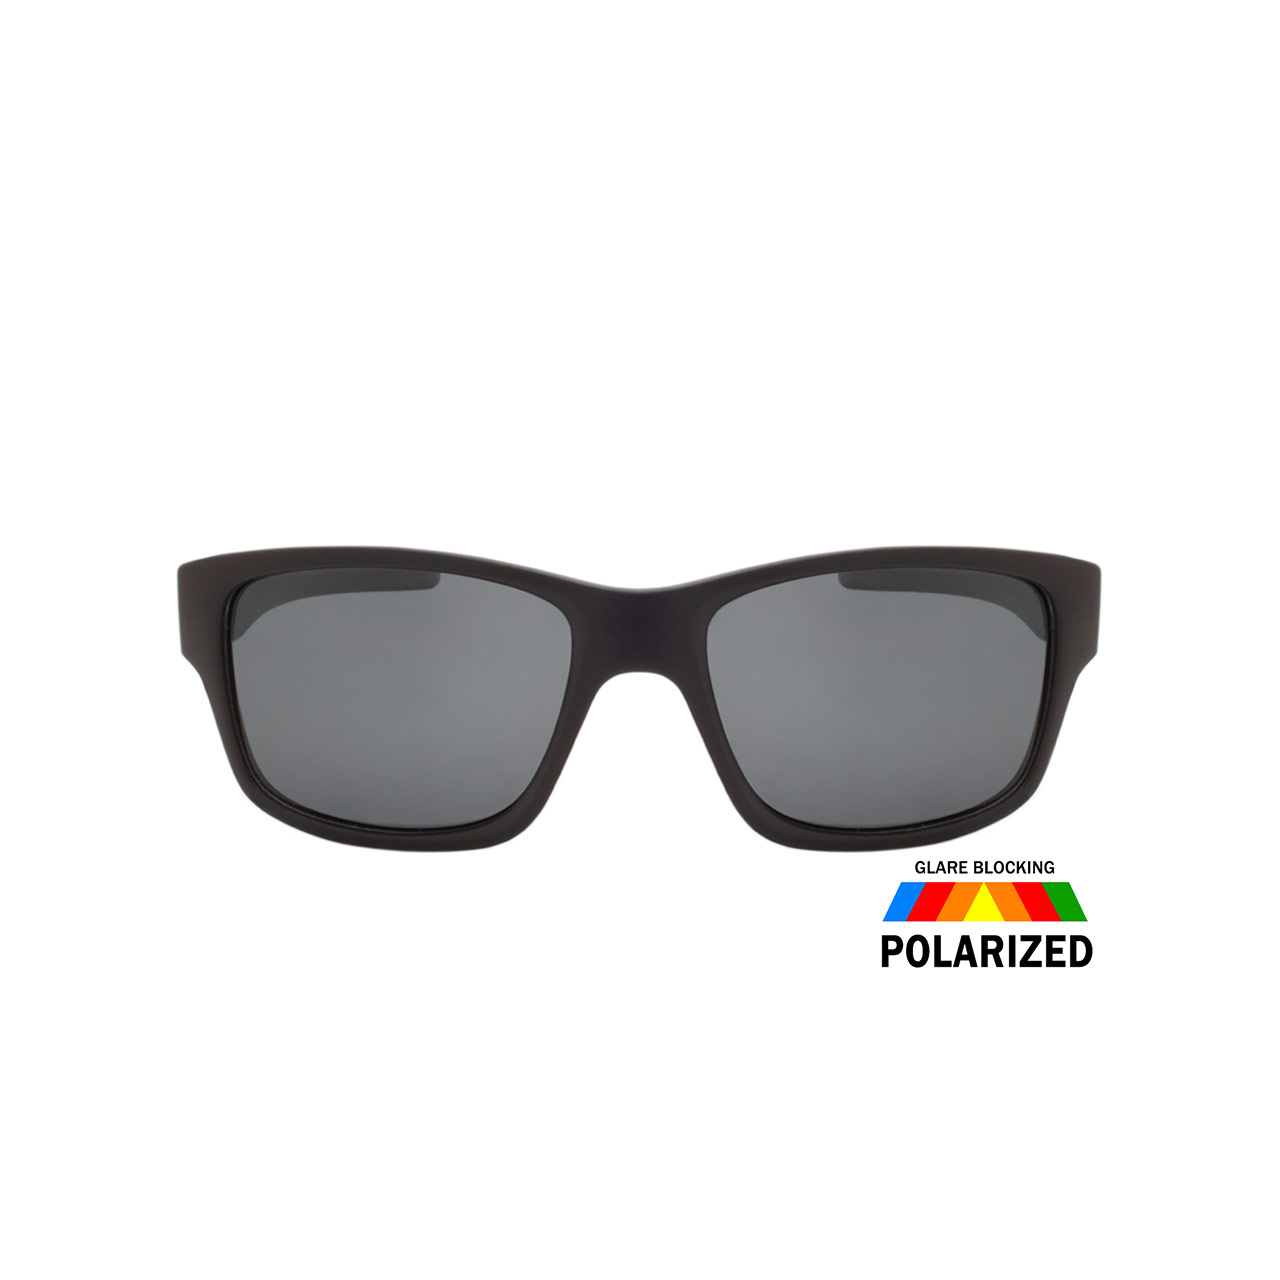 Mens Polarized Sunglasses 2 Pack All Black Sport Wrap Sunglass Style - image 5 of 5